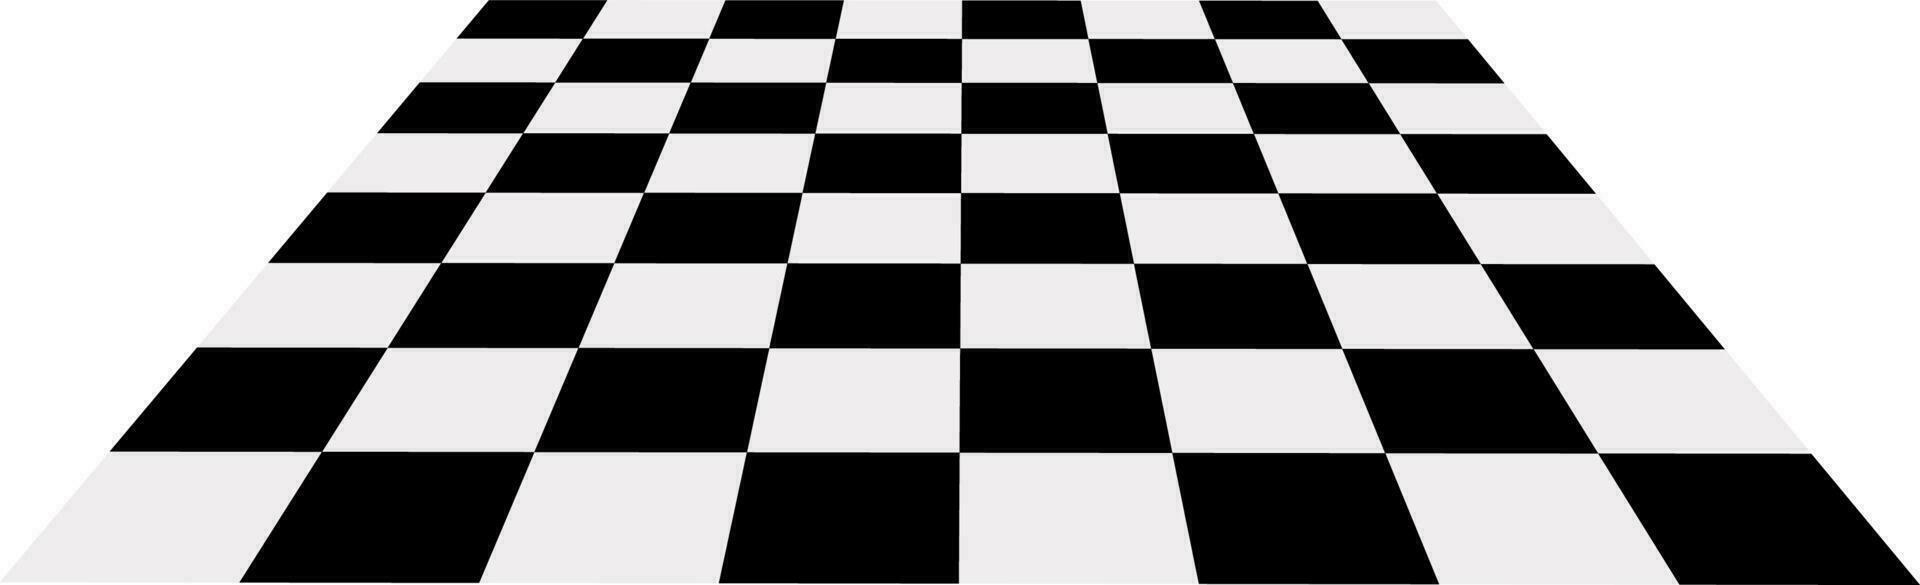 Flat style icon of a chess board. vector